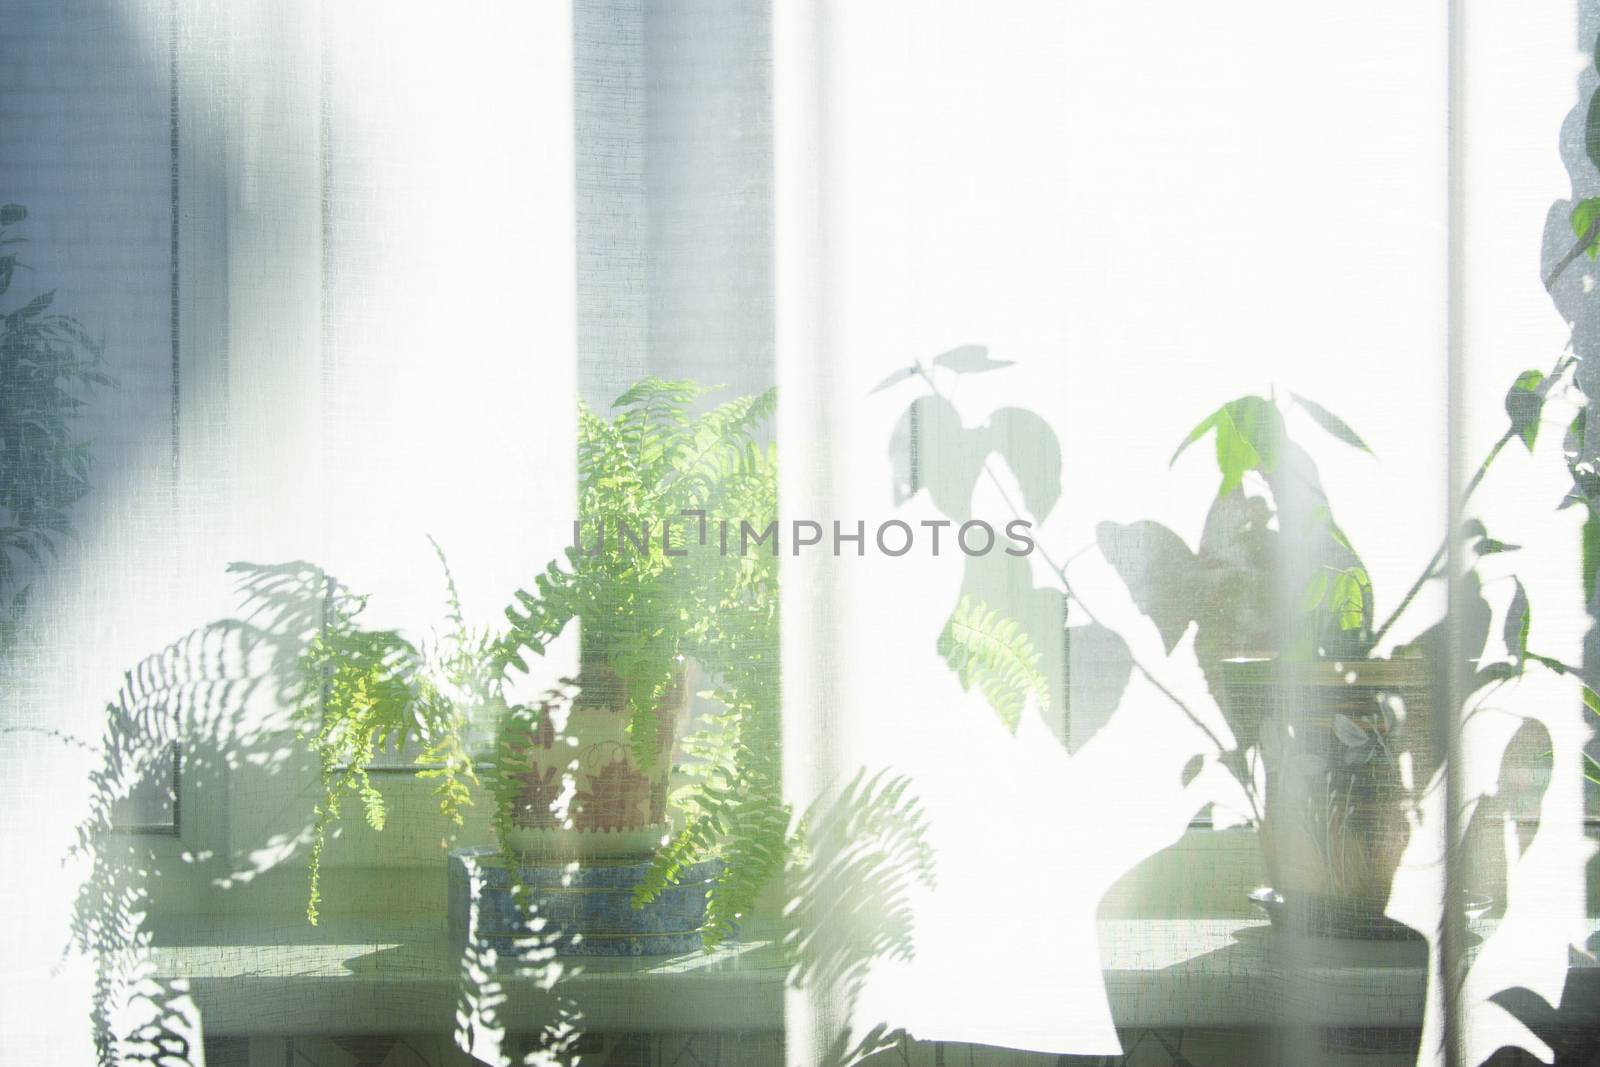 Sunlight from window into a room thick white curtains. Plants and trees on a windowsill.